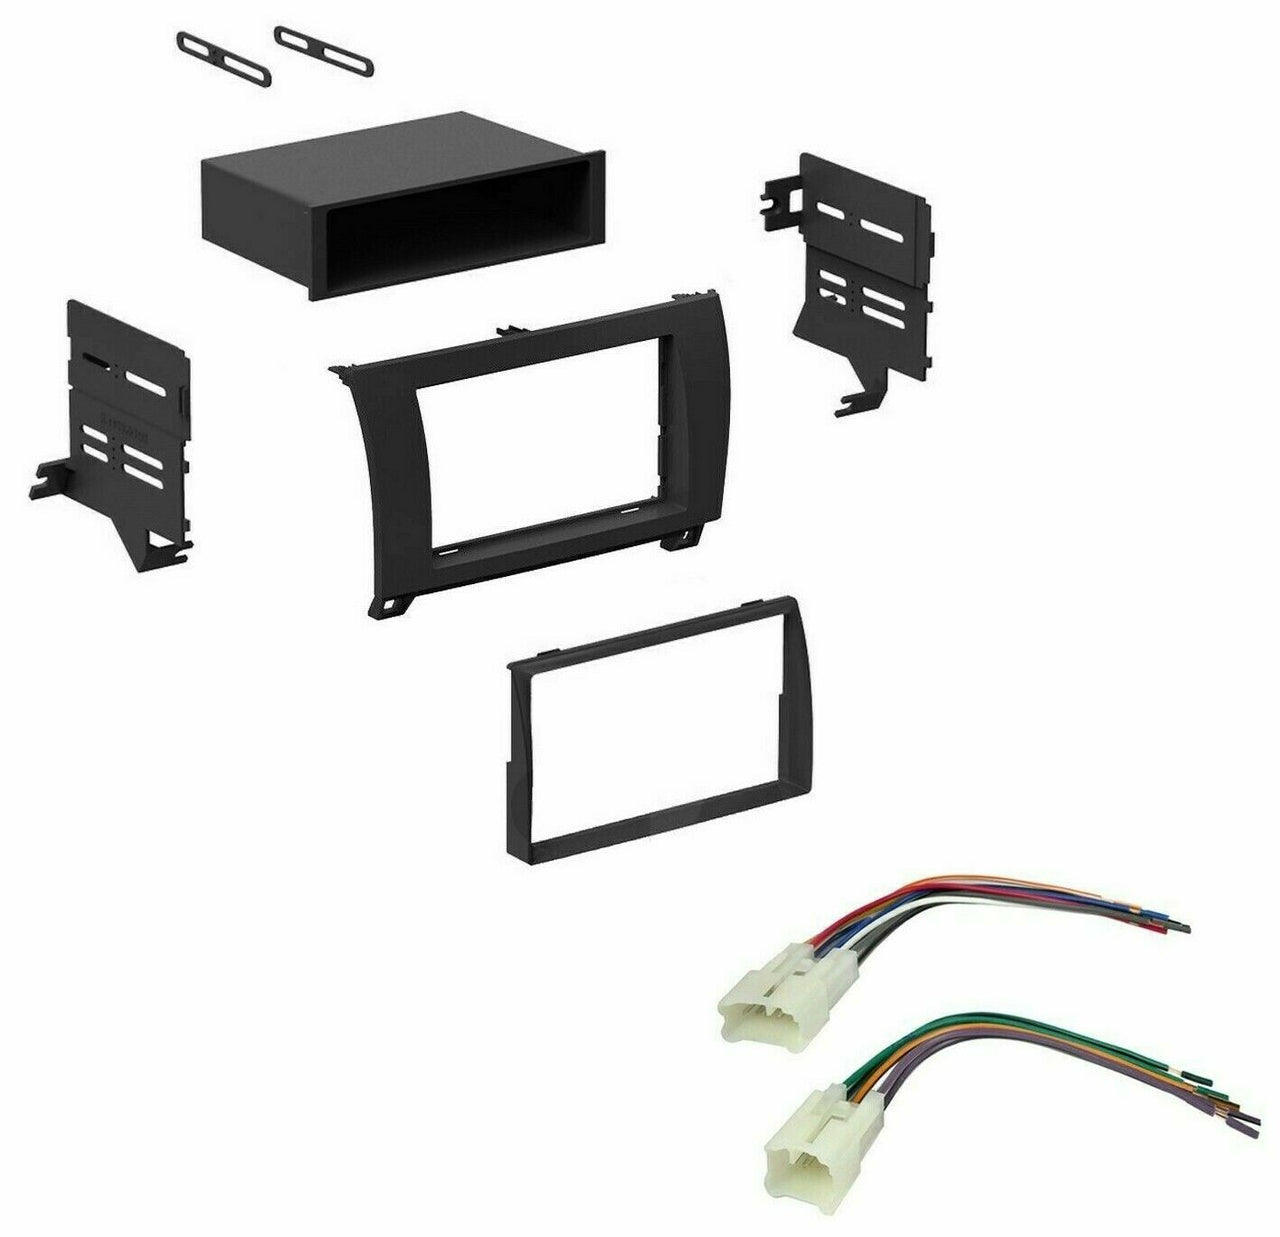 Single Double DIN Stereo Dash Kit Harness for 2007-2012 Toyota Tundra Sequoia